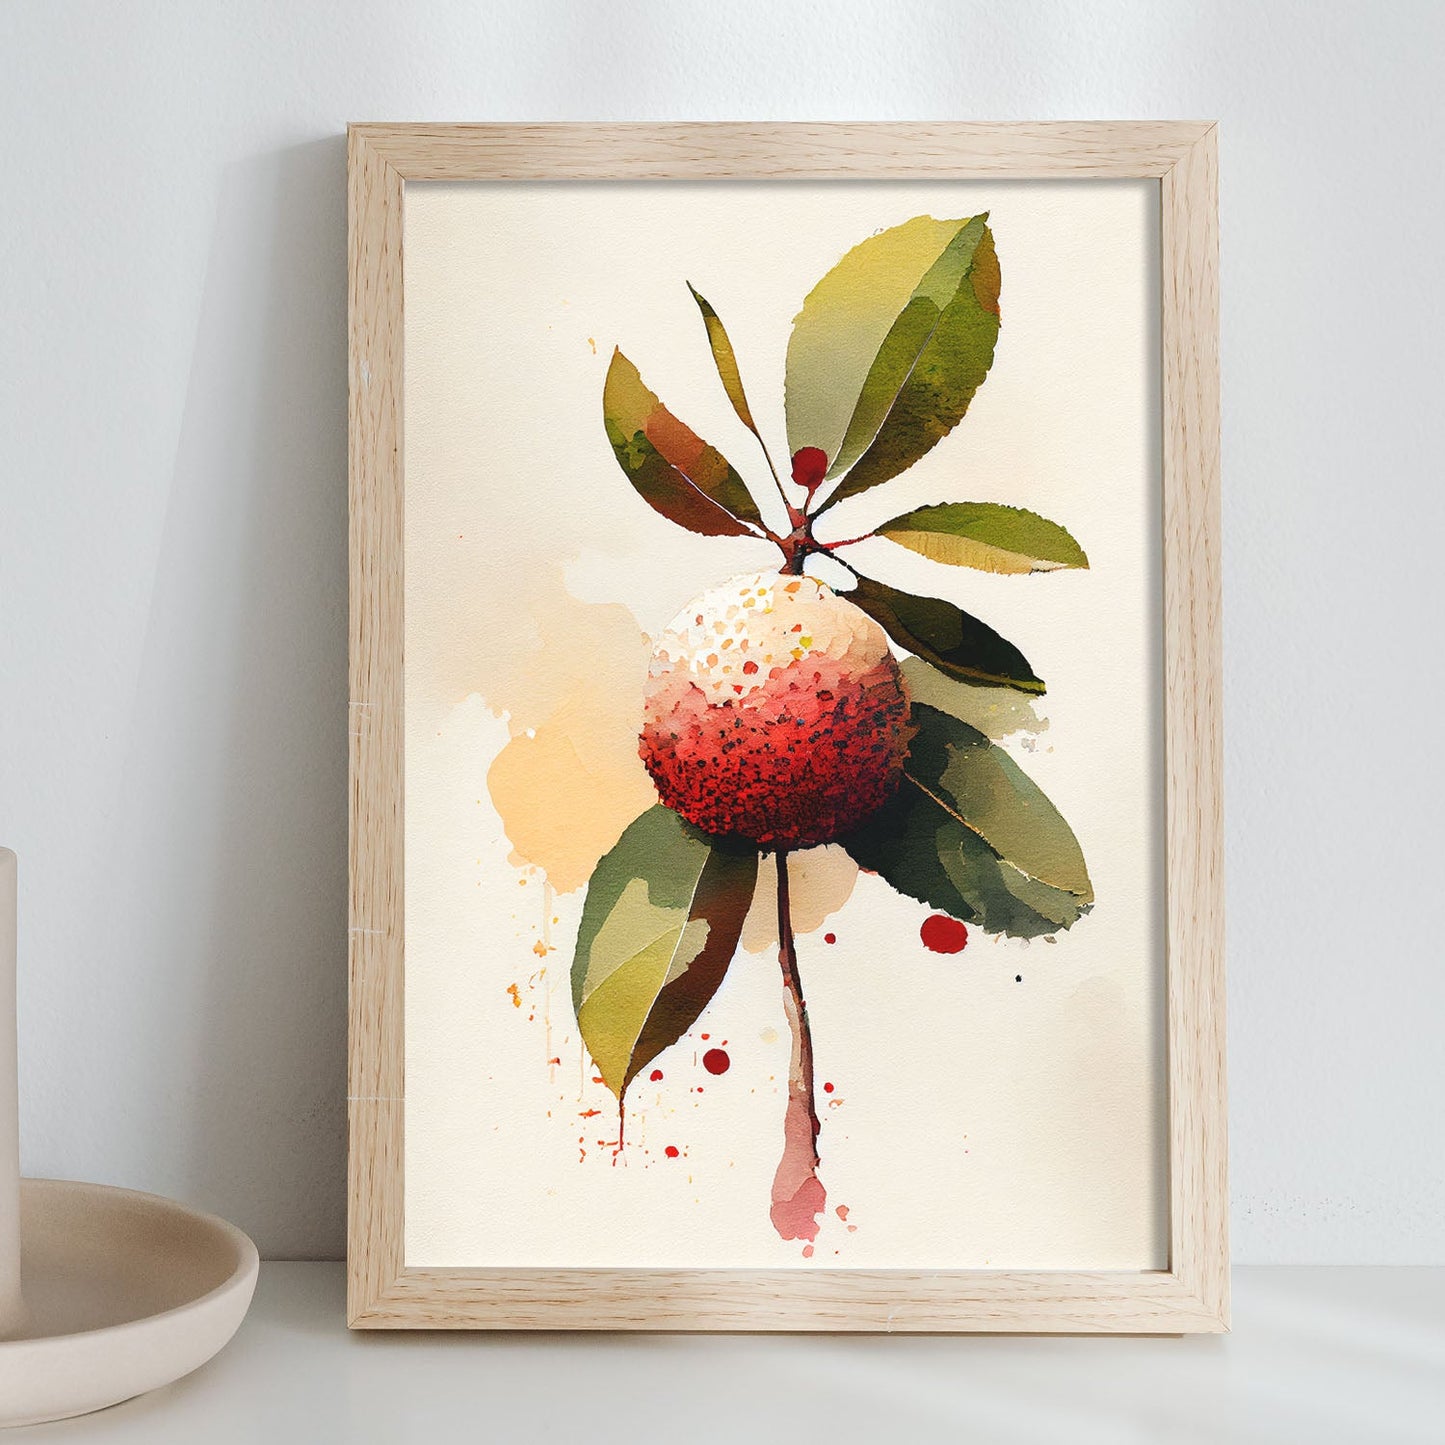 Nacnic minimalist Lychee_1. Aesthetic Wall Art Prints for Bedroom or Living Room Design.